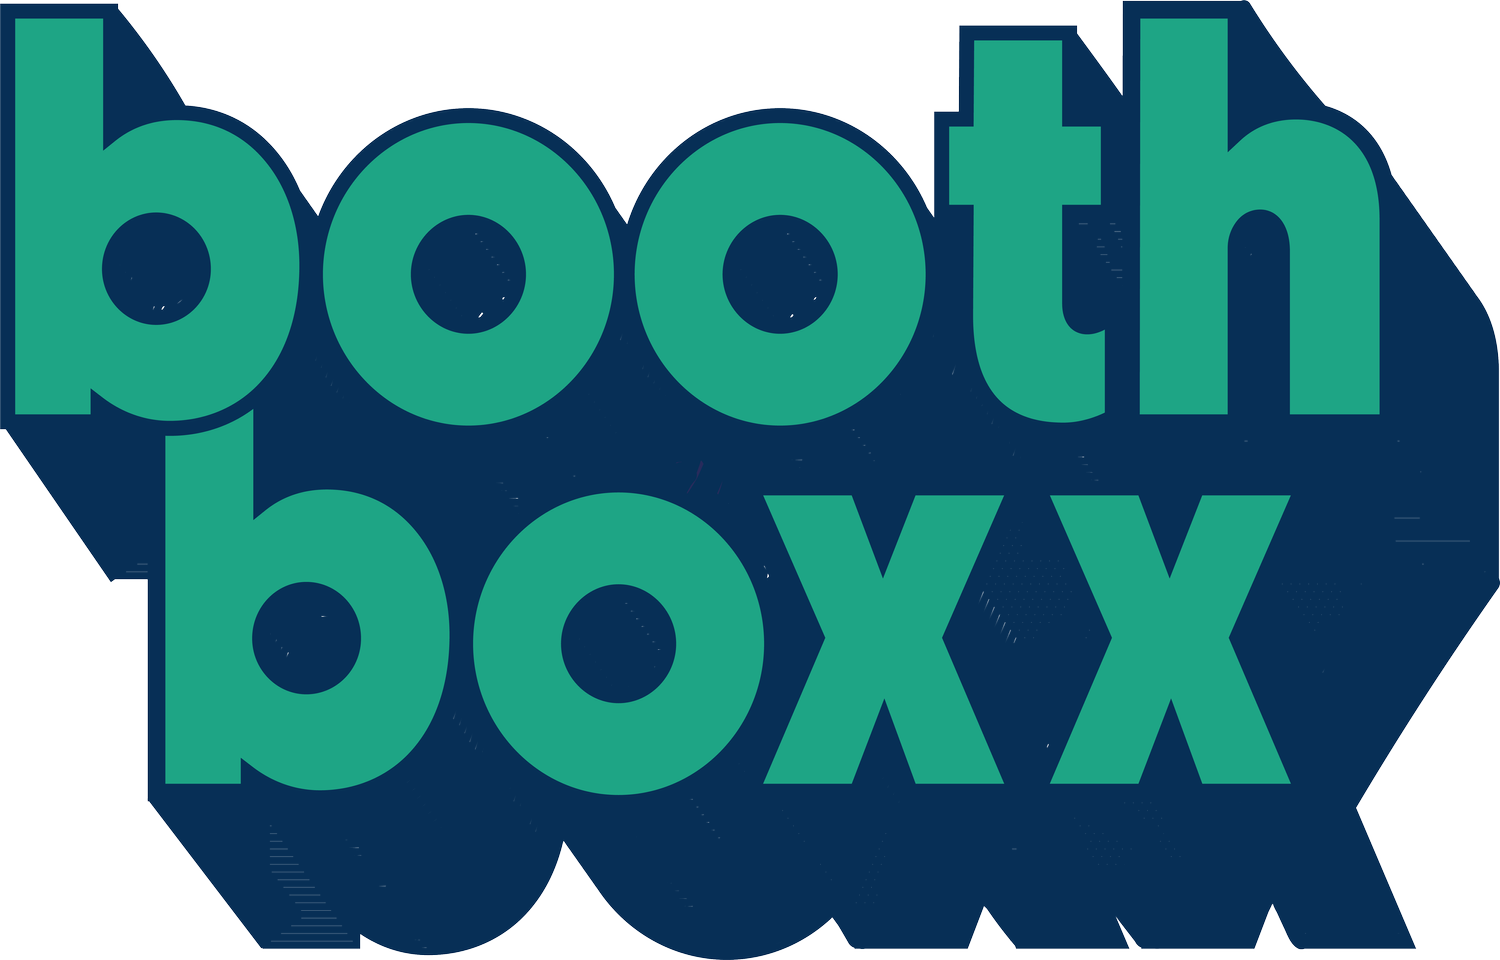 Booth Boxx